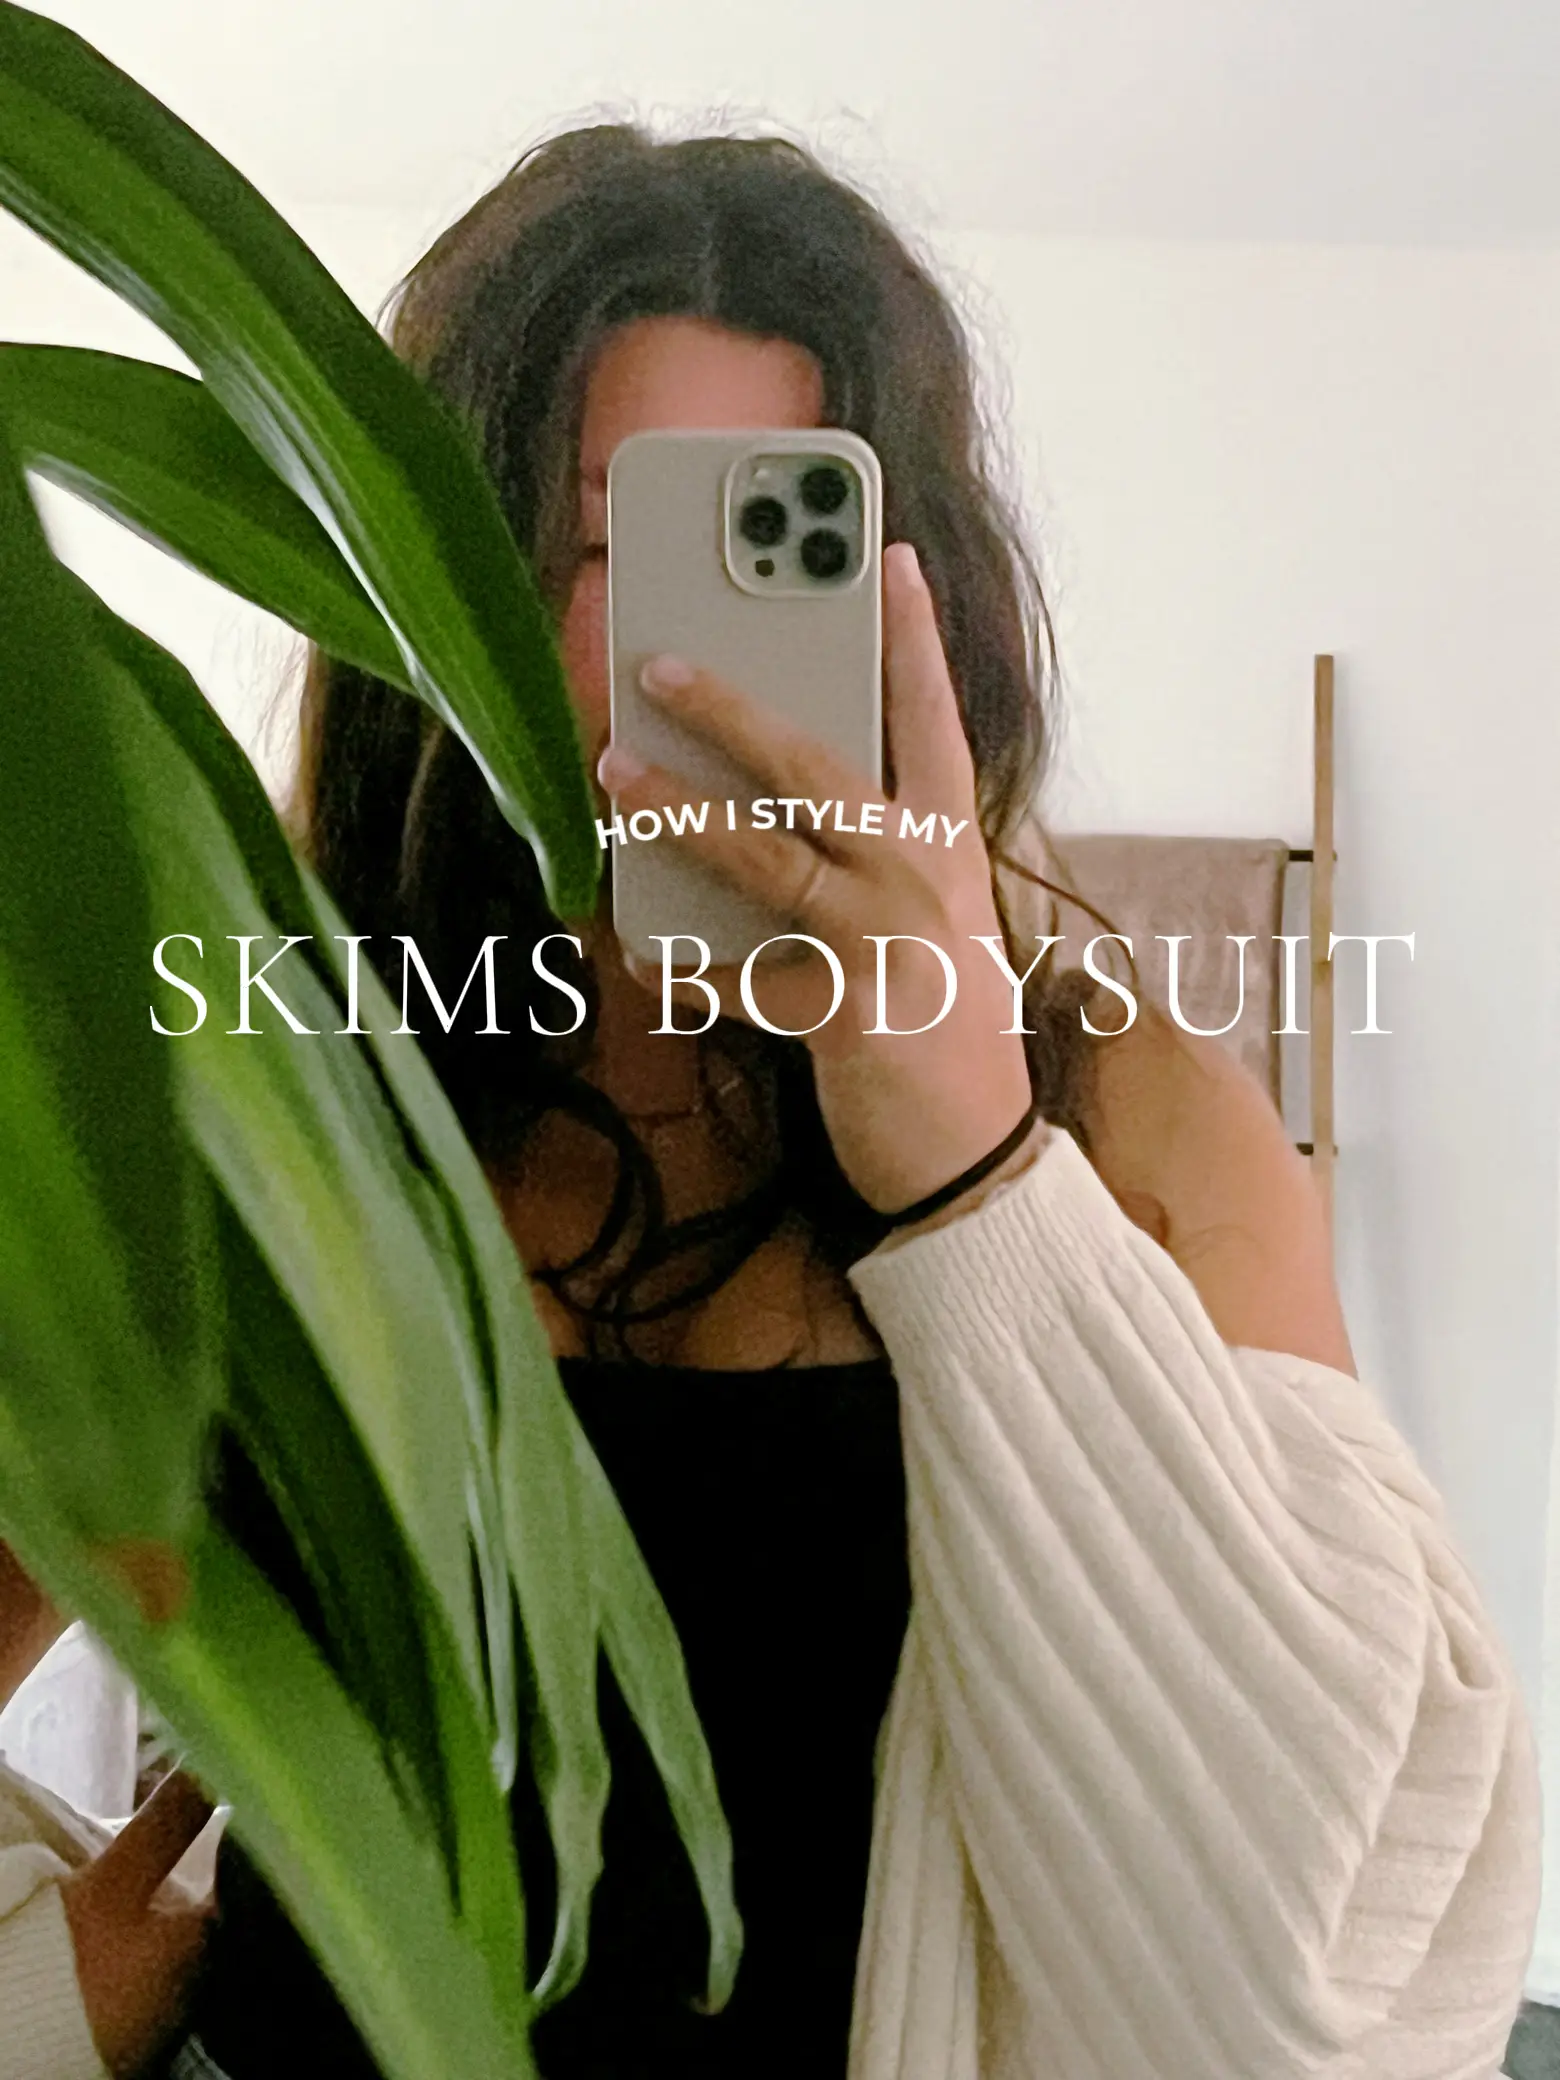 SKIMS Bodysuit: How I style for work, Gallery posted by Alexis Henning